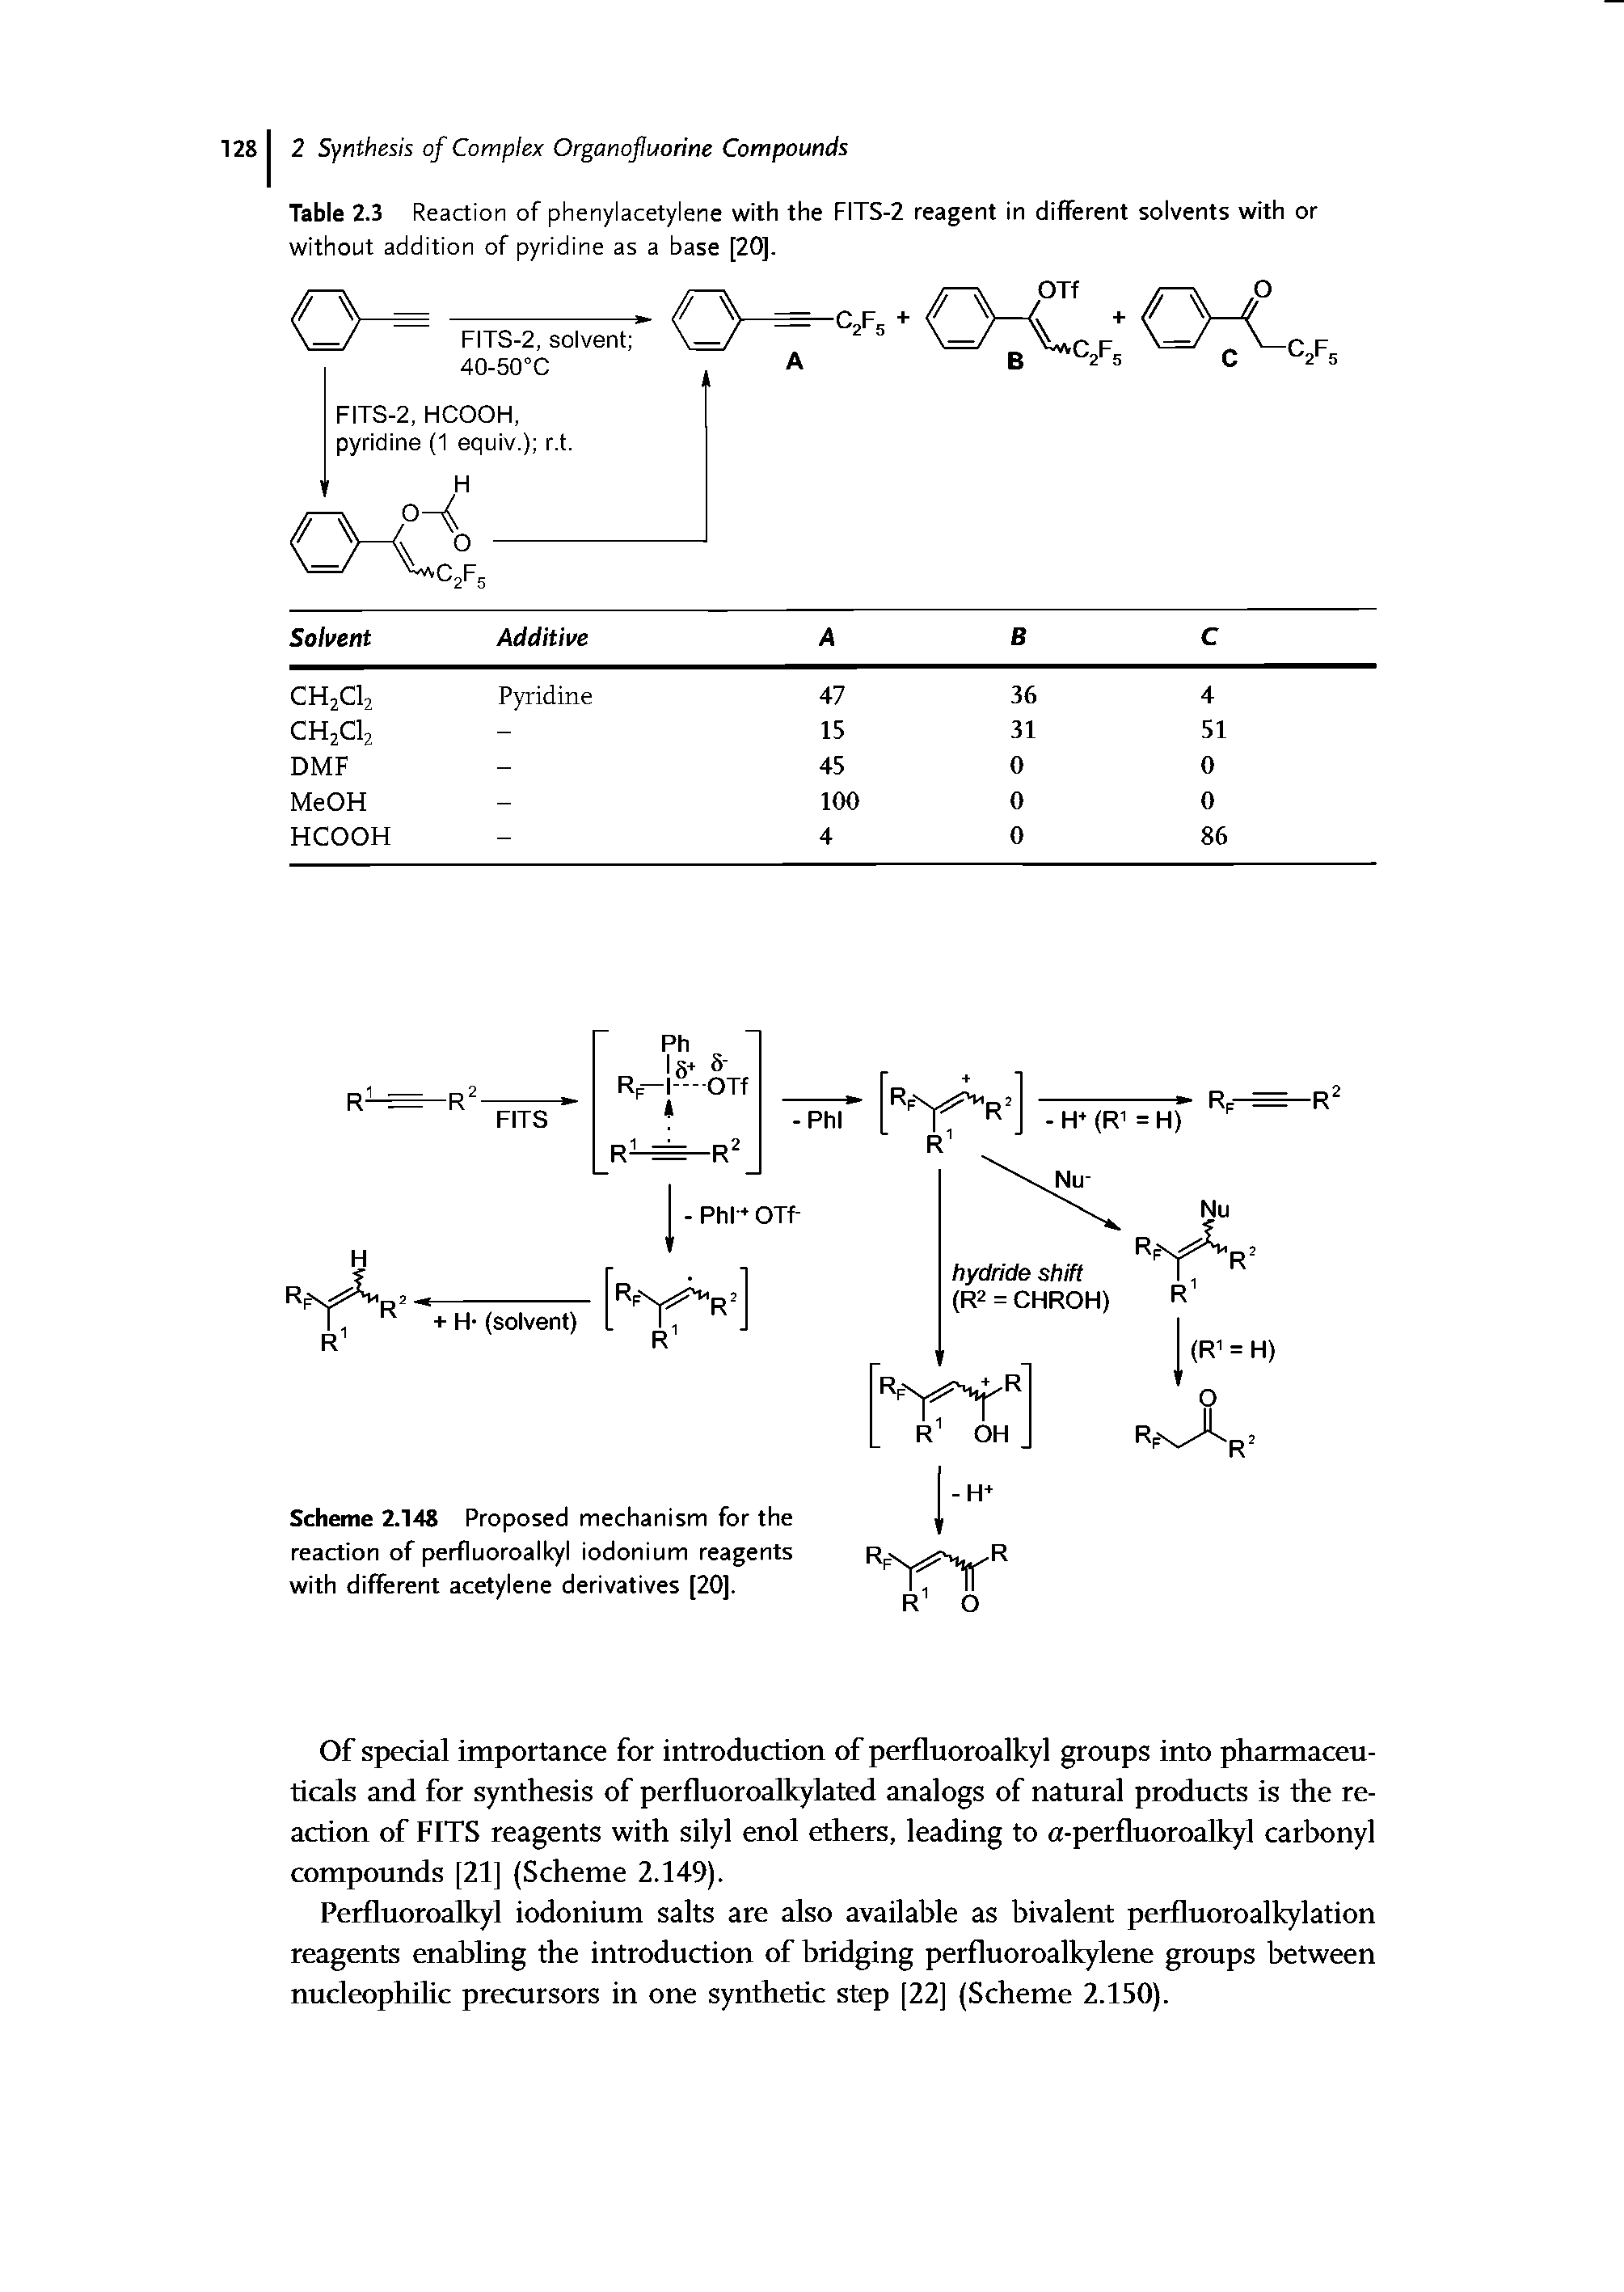 Scheme 2.148 Proposed mechanism for the reaction of perfluoroalkyl iodonium reagents with different acetylene derivatives [20].